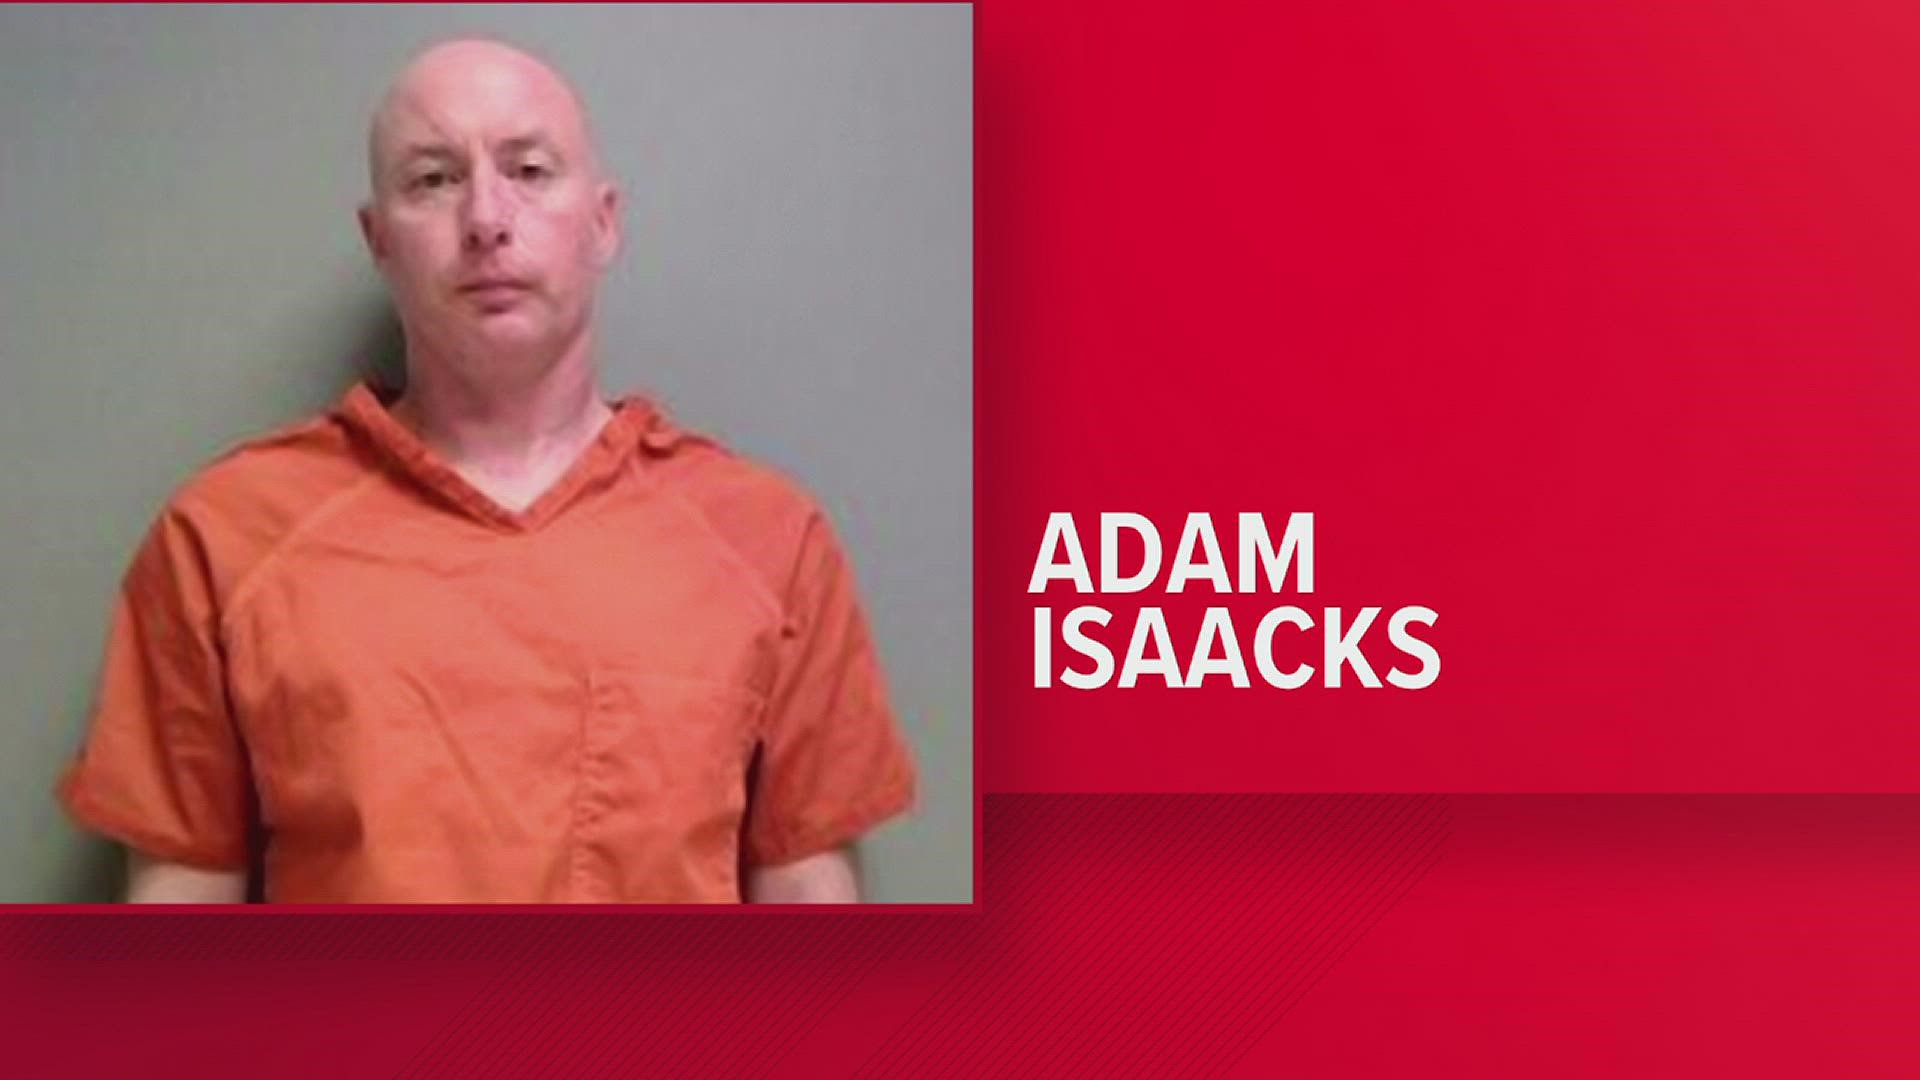 Multiple sources tell 12News these new federal charges stem from allegations he was transporting children across state lines for inappropriate sexual contact.